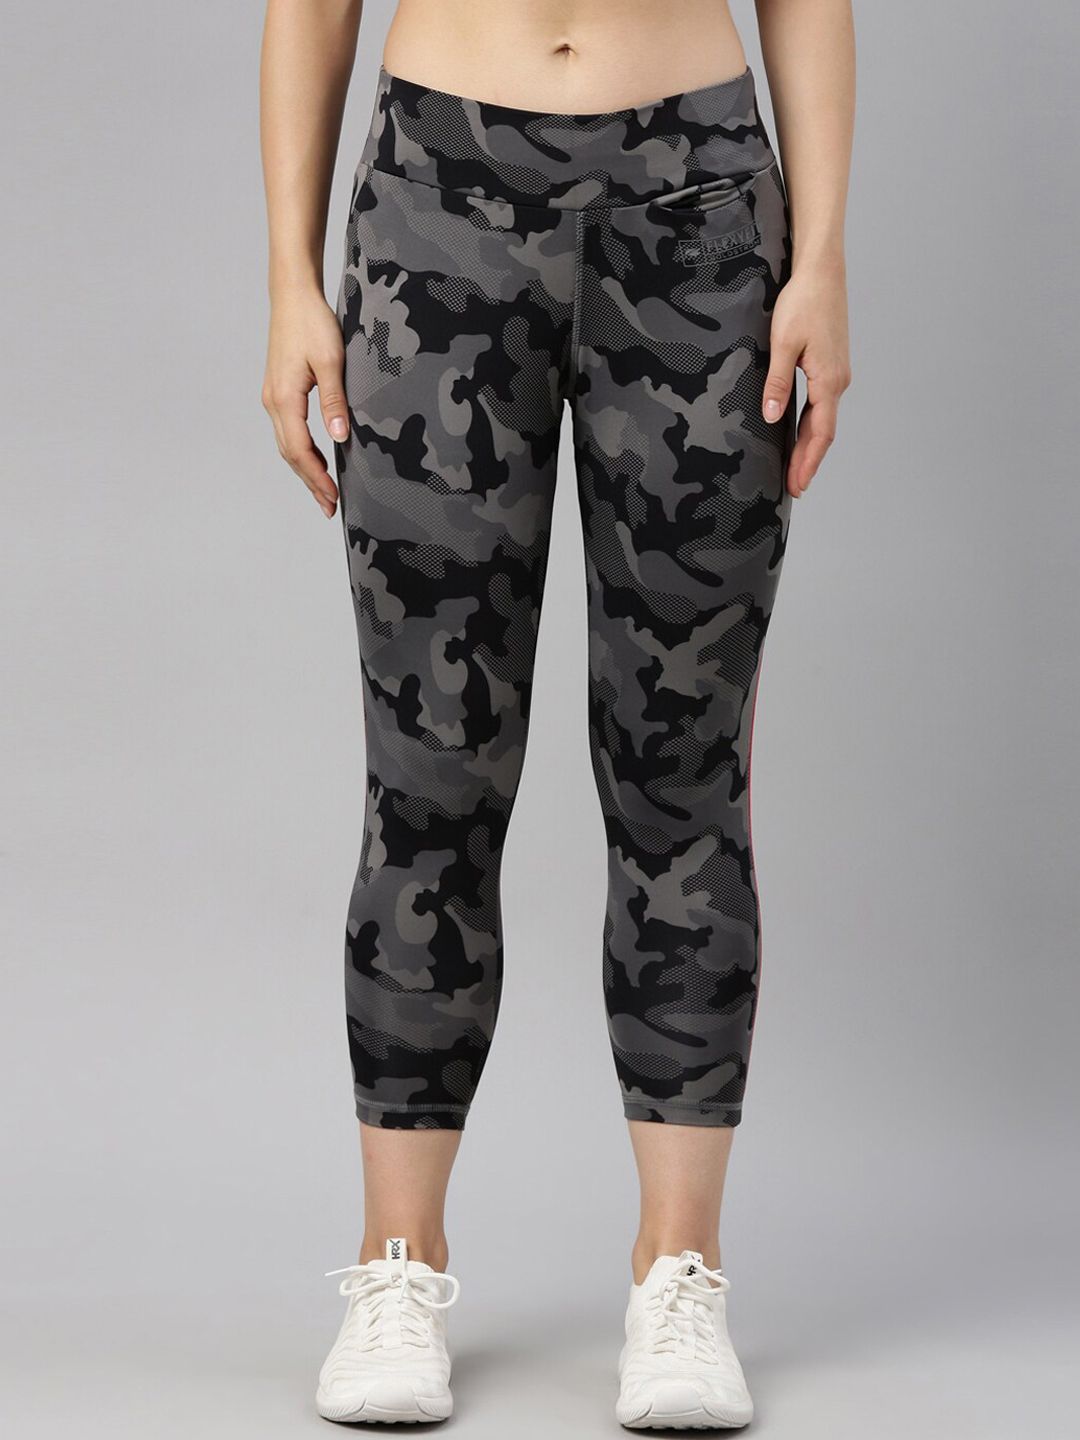 GOLDSTROMS Women Grey & Black Camouflage Printed Flexi-Fit Activewear Tights Price in India